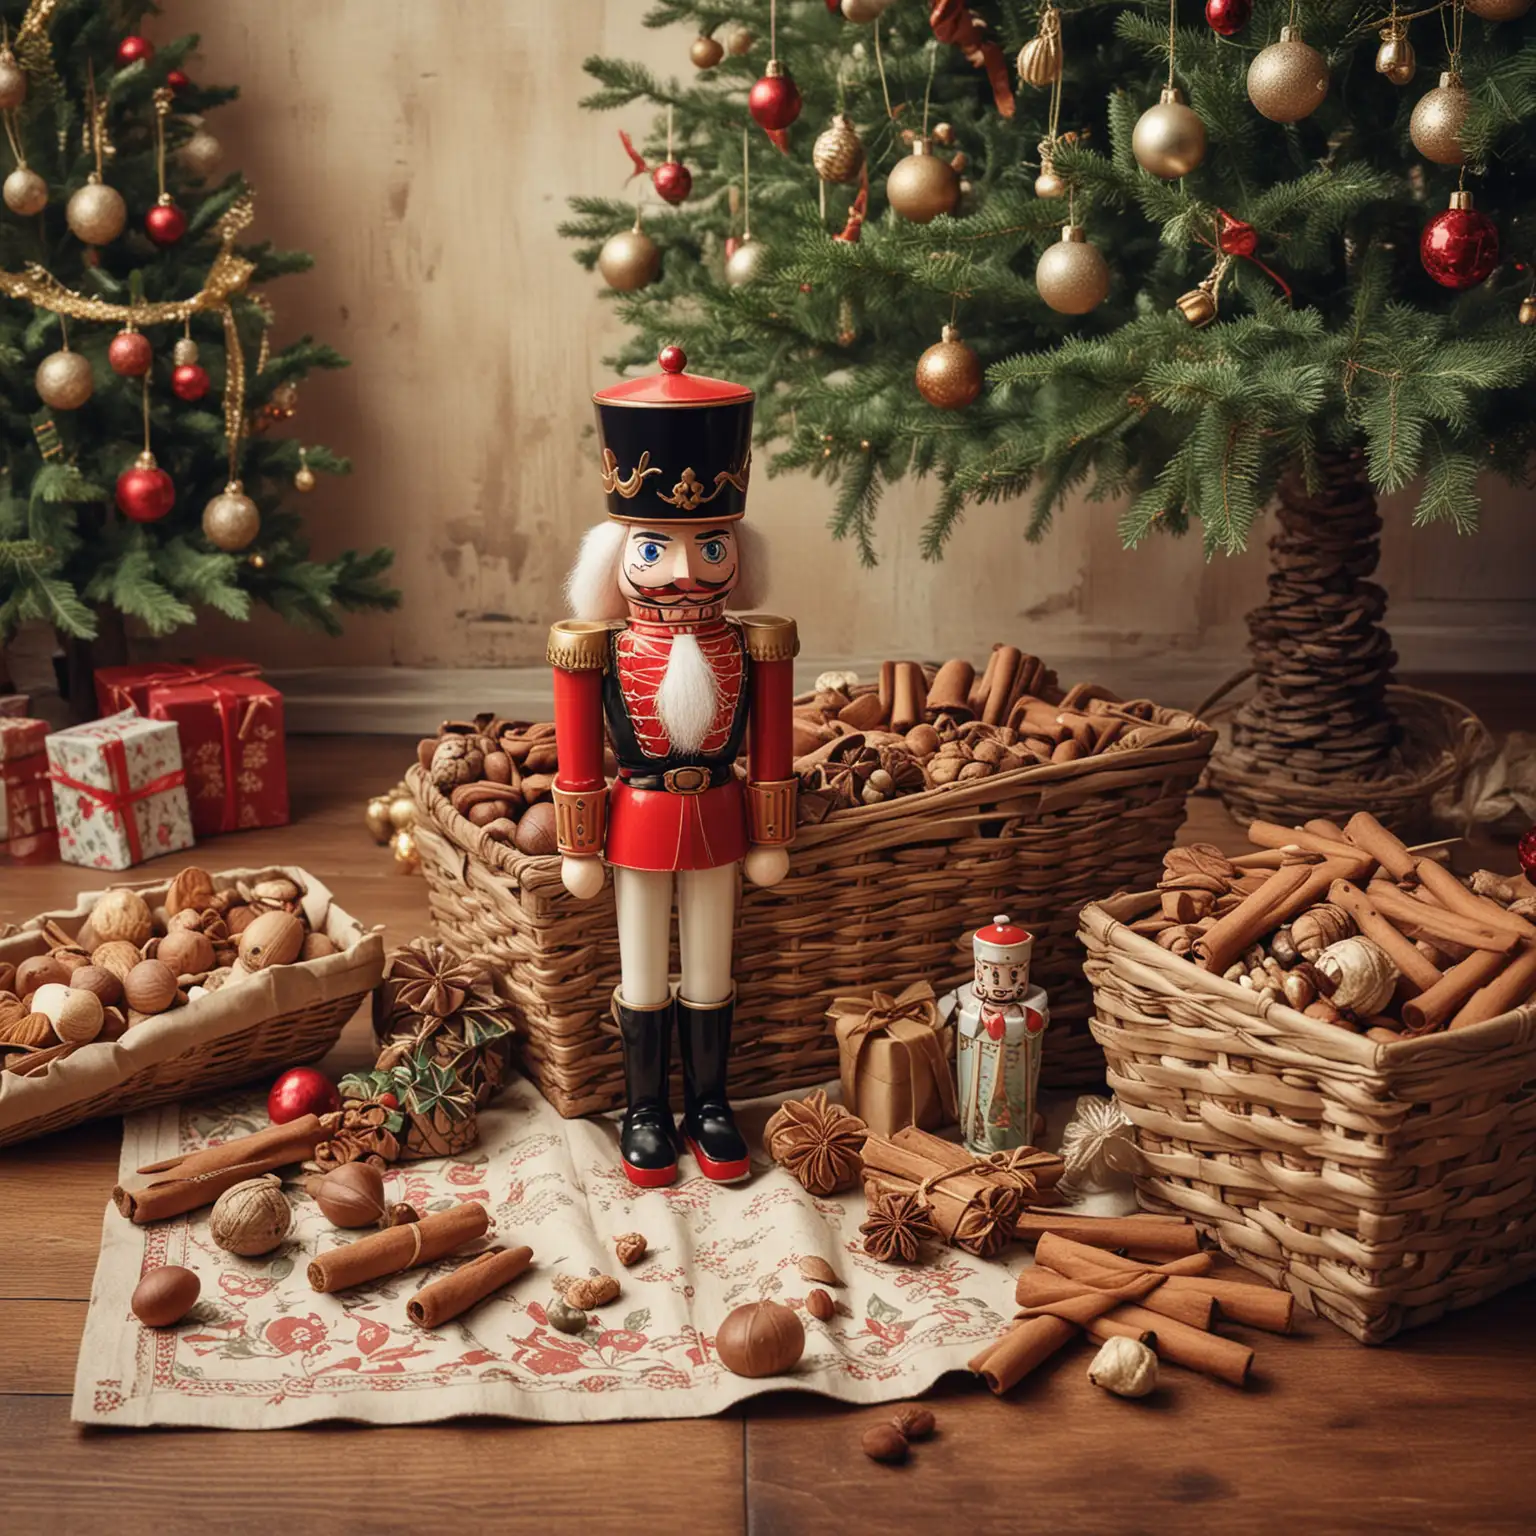 Old looking illustration
Front: The nutcracker in a slightly horizontal angle. Background: A large decorated Christmas tree, Christmas presents. Cinnamon and nuts in a basket. 
